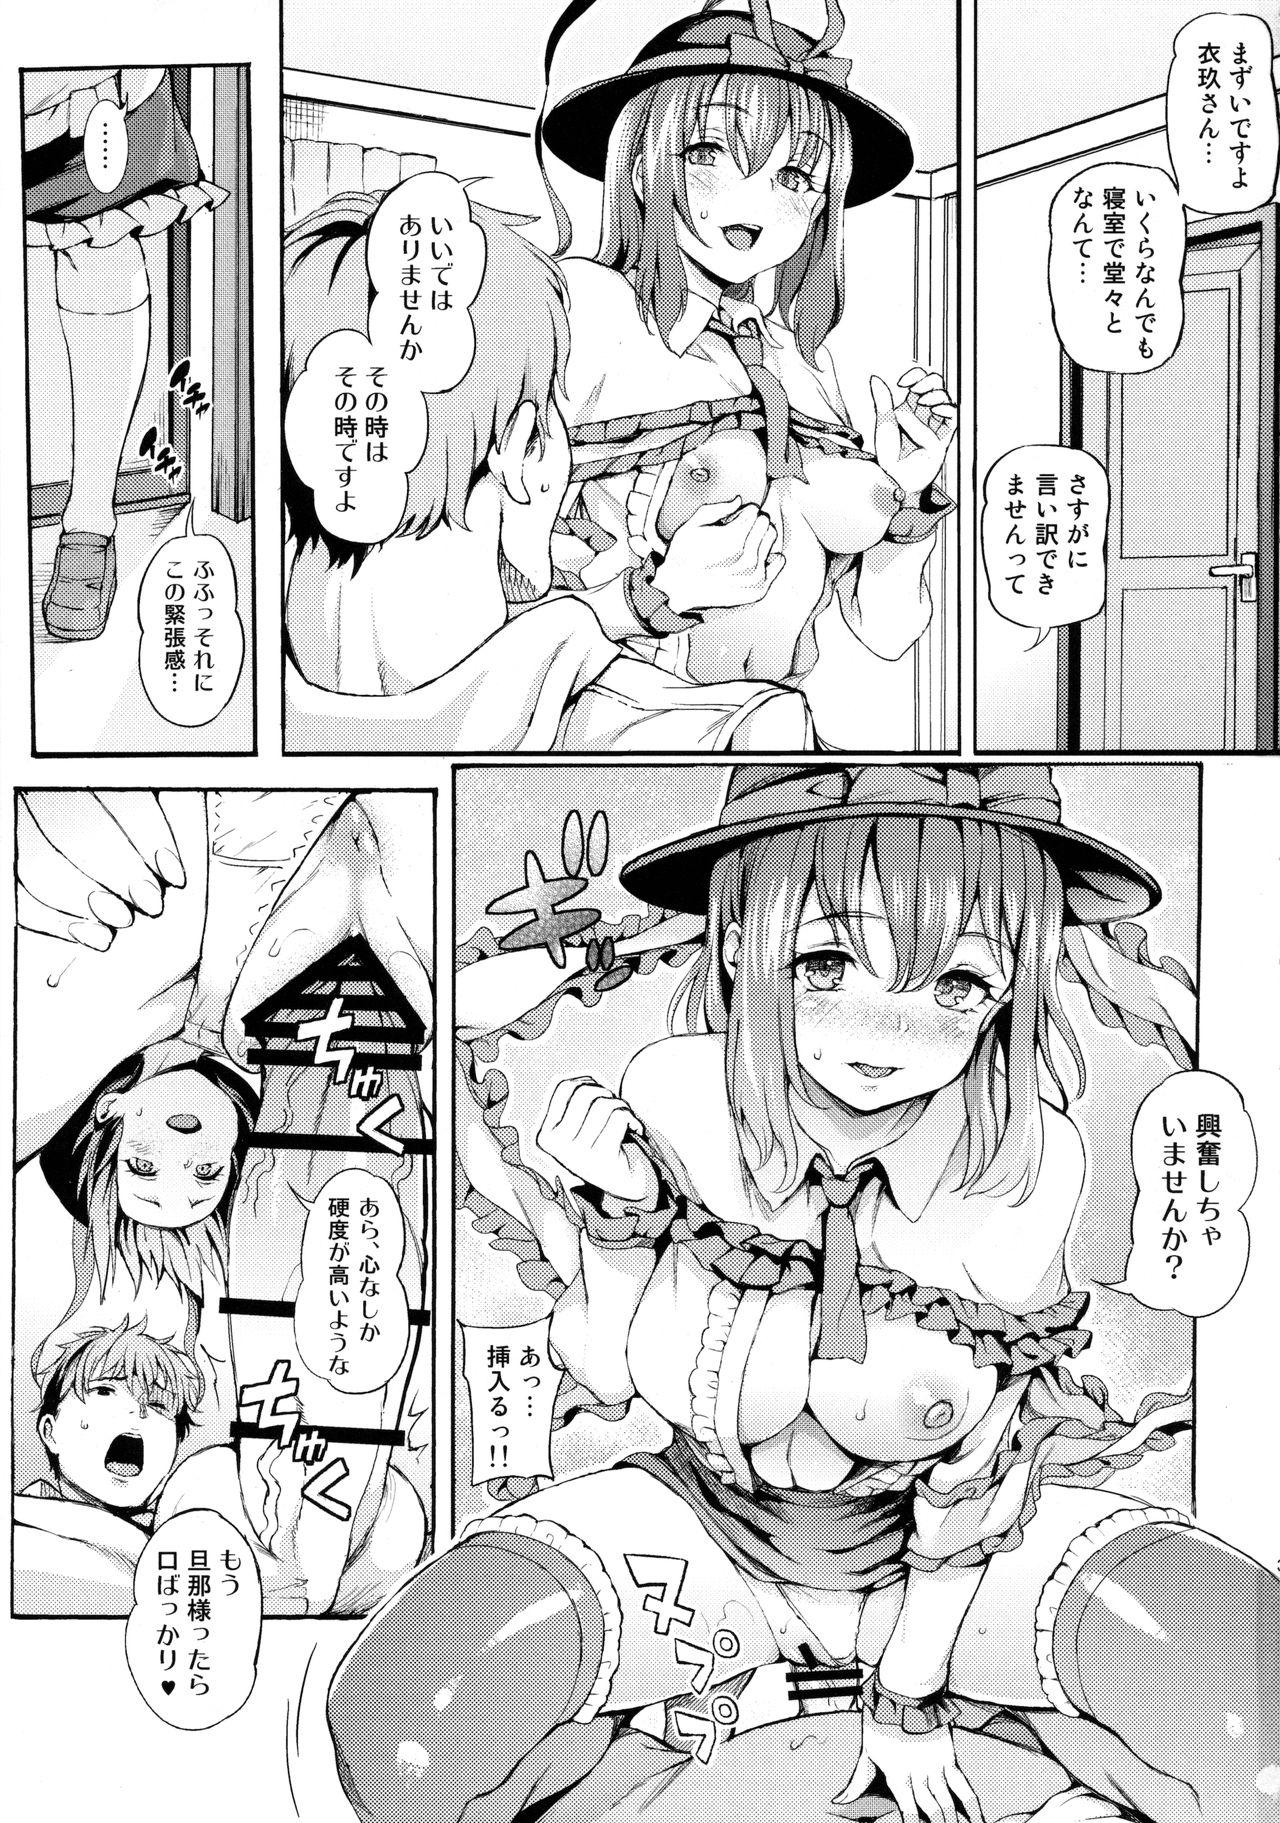 Gayfuck Second marriage - Touhou project Girl - Page 2